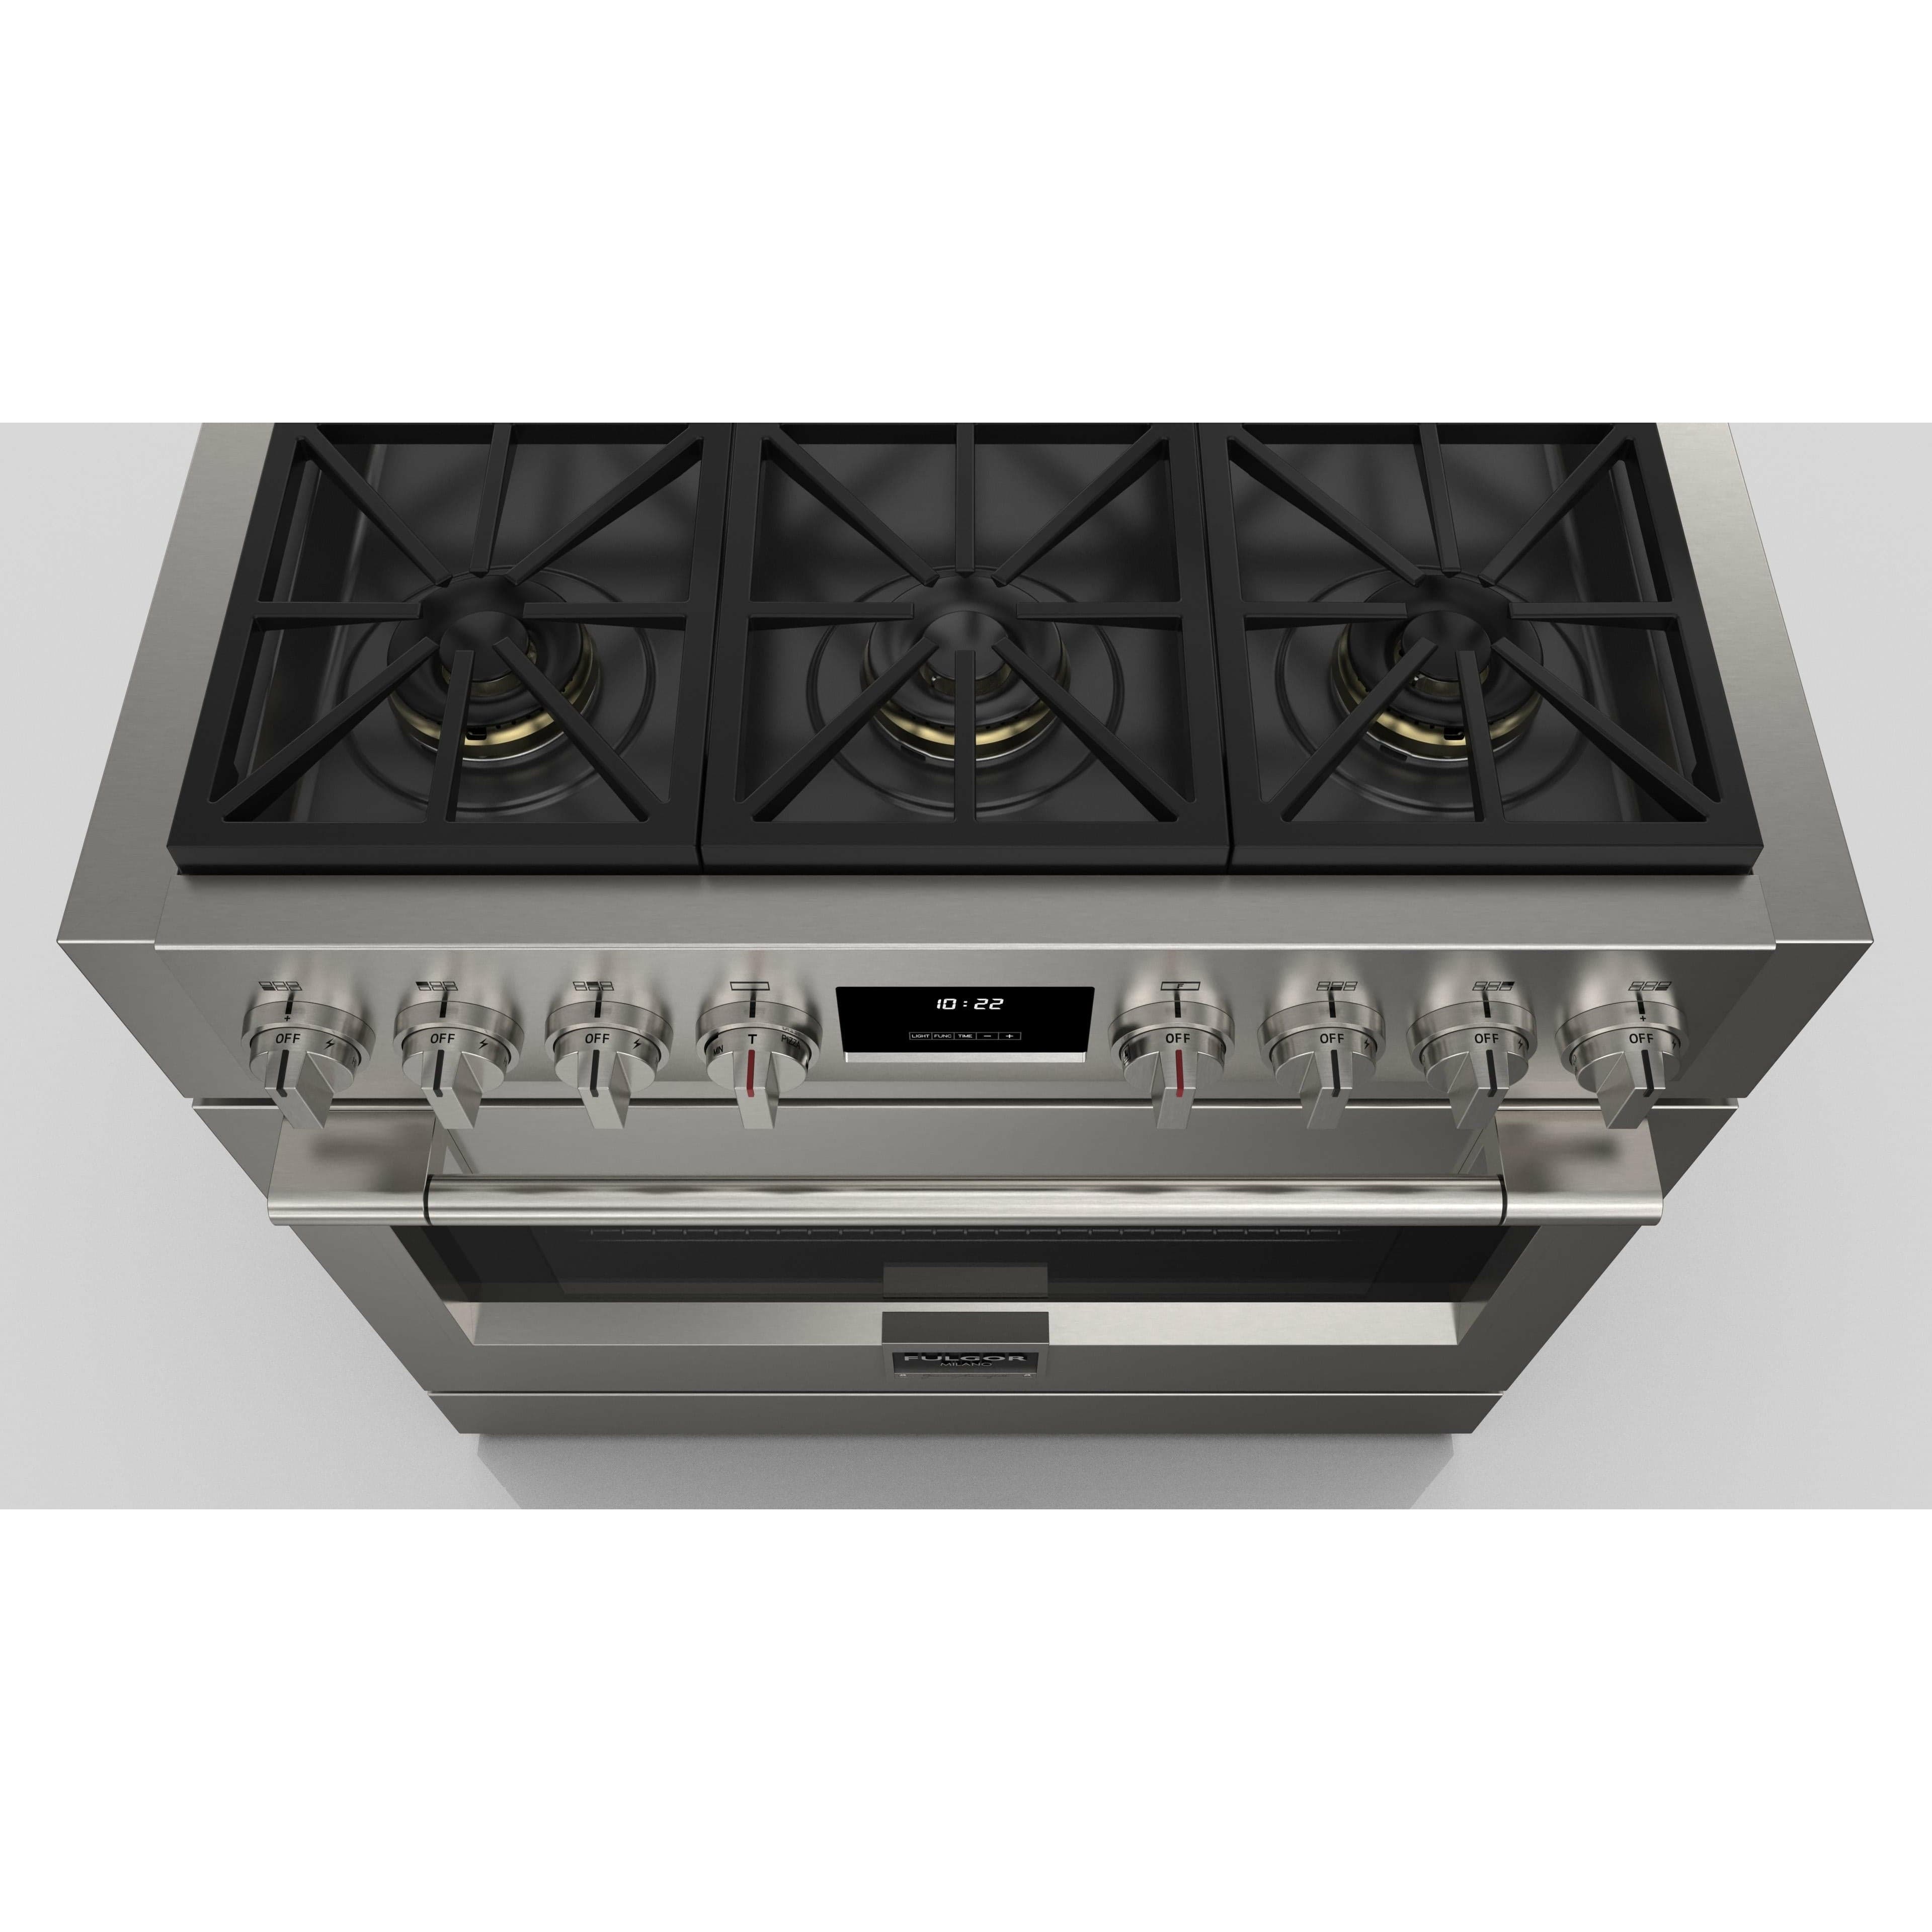 Fulgor Milano 36" Professional Gas Range with 6 Dual-Flame Burners, 5.7 cu. ft. Capacity, Stainless Steel - F6PGR366S2 Ranges Luxury Appliances Direct